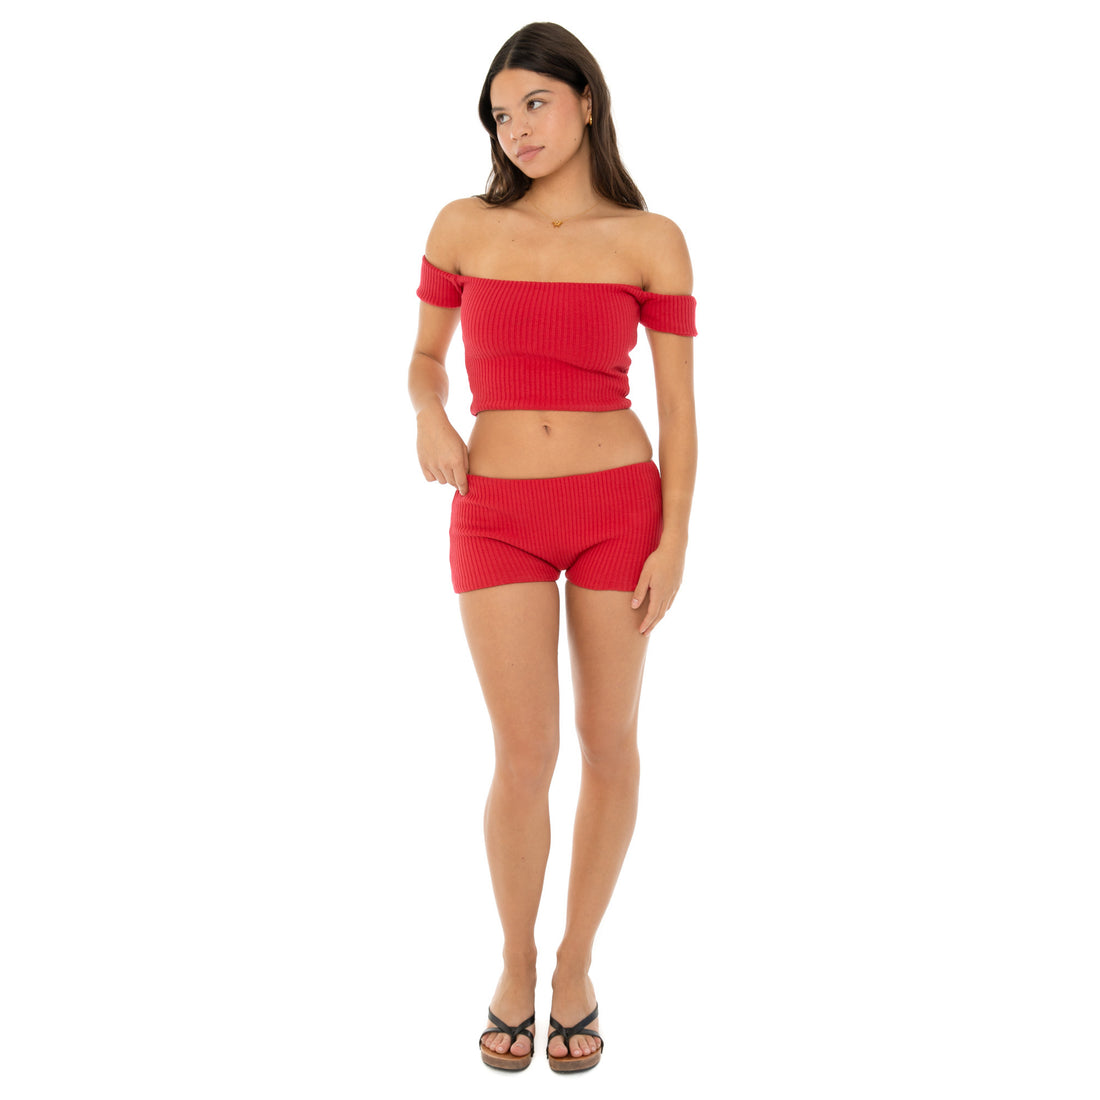 Are You Am I - Minka Top **red